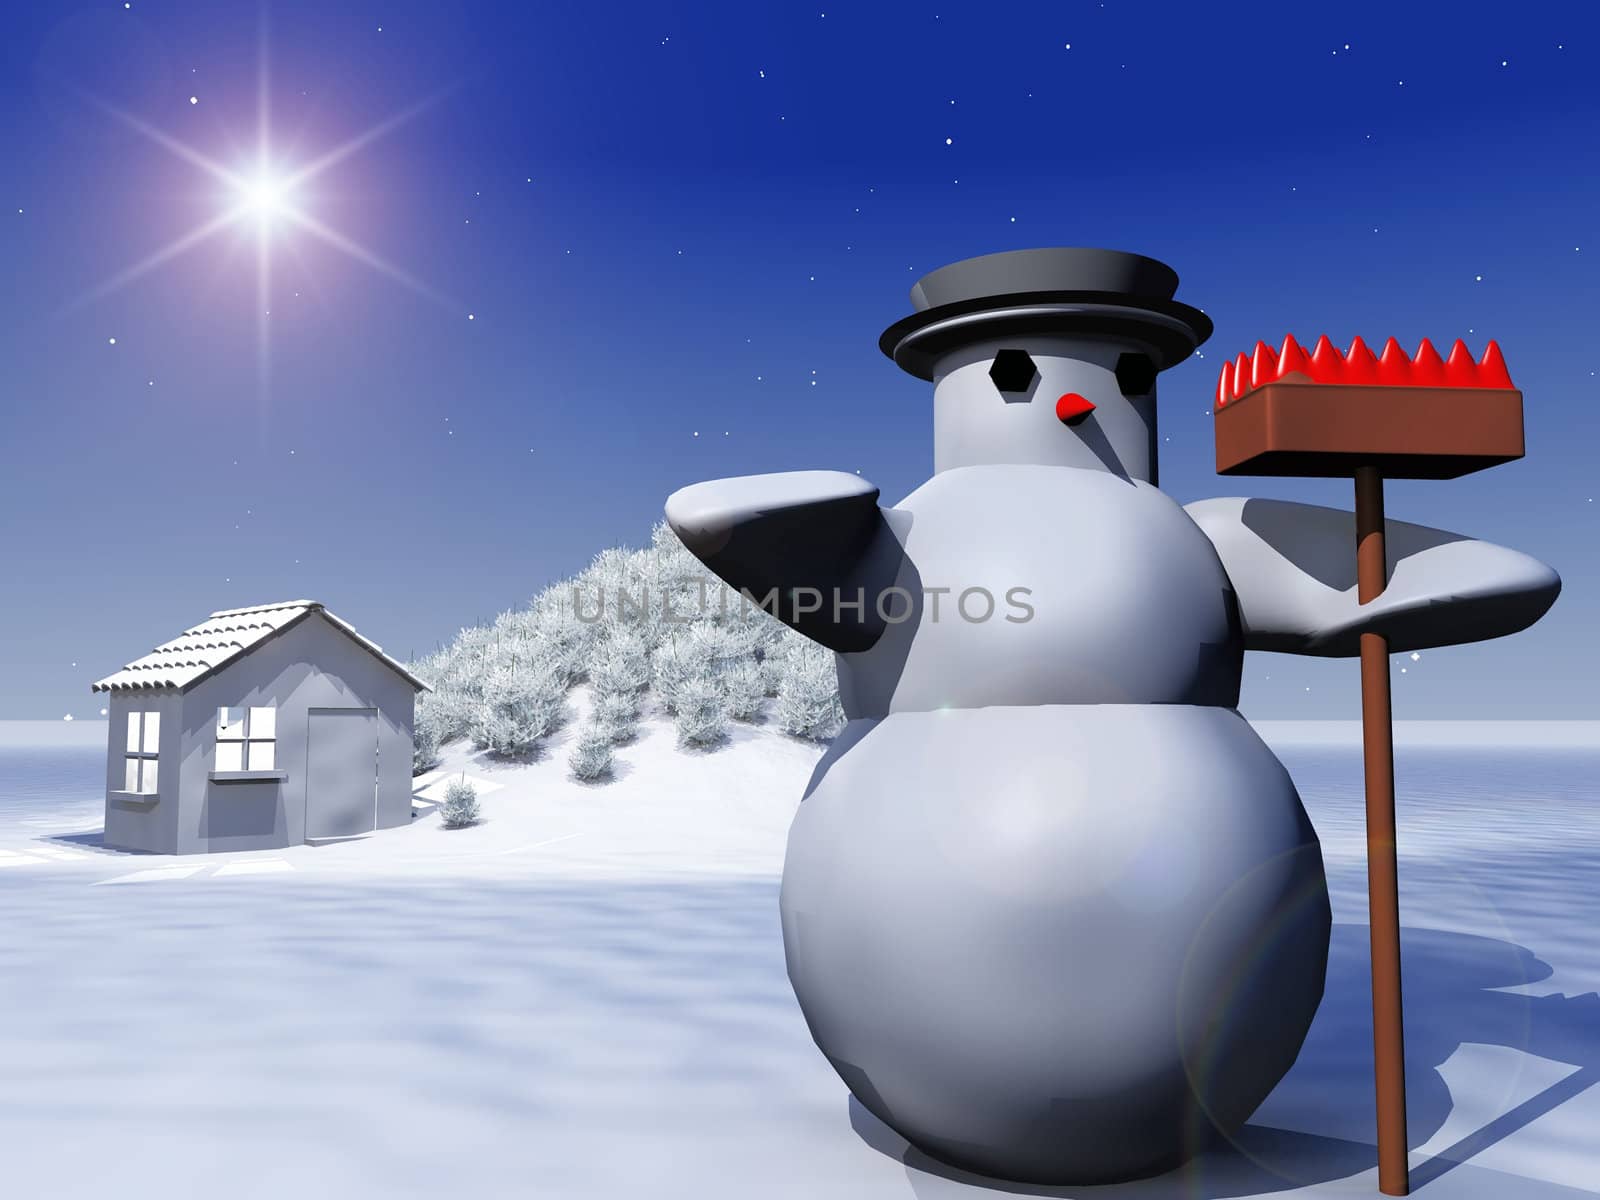 snowman and snow-covered landscape